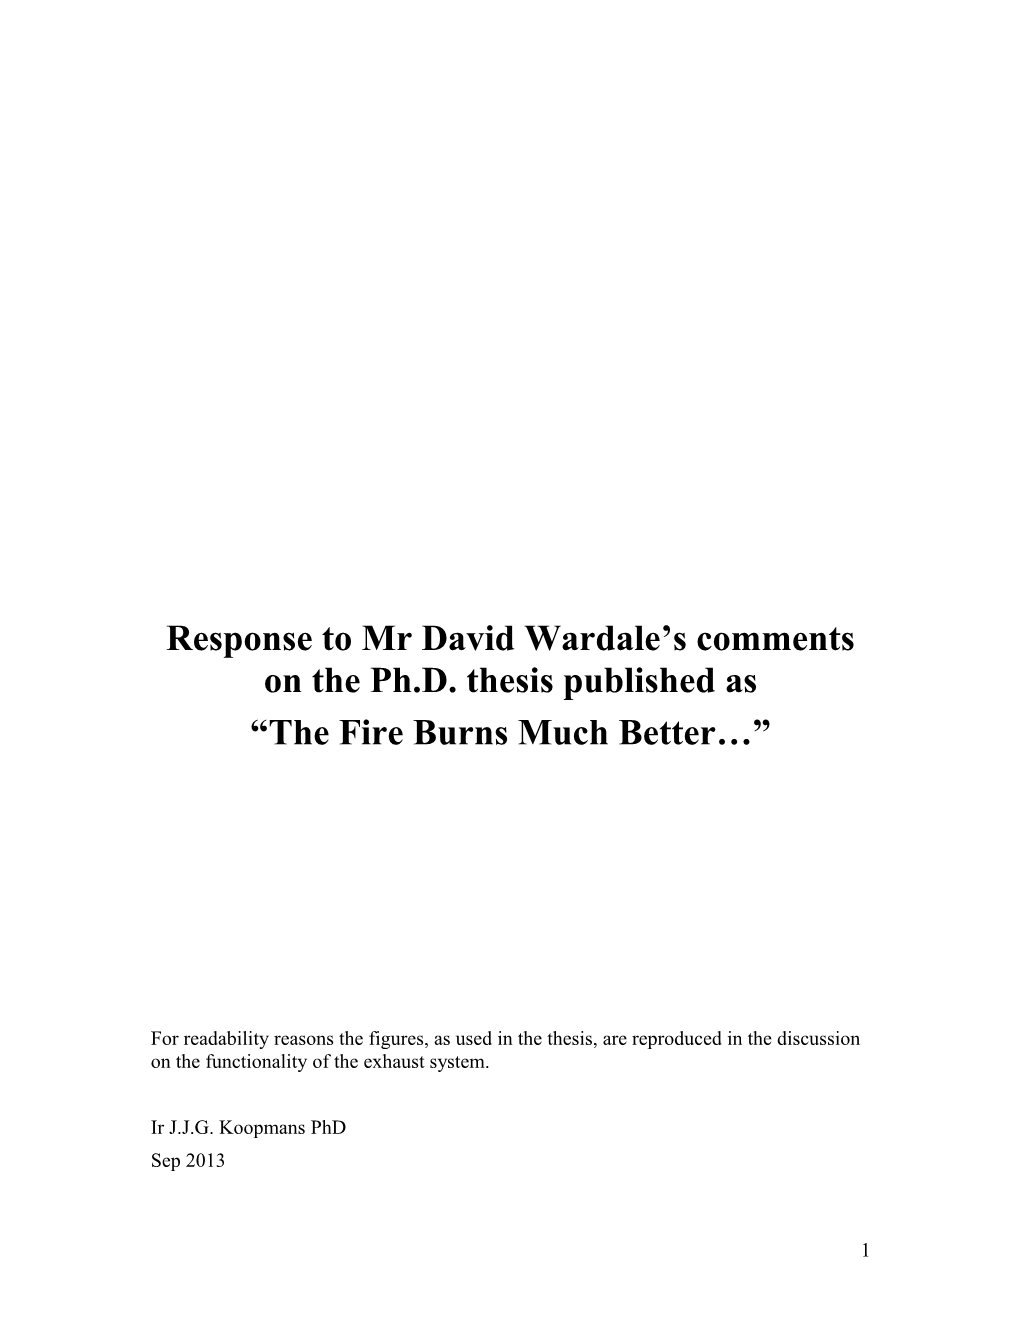 Response of Koopmans to Comments of David Wardale on "The Fire